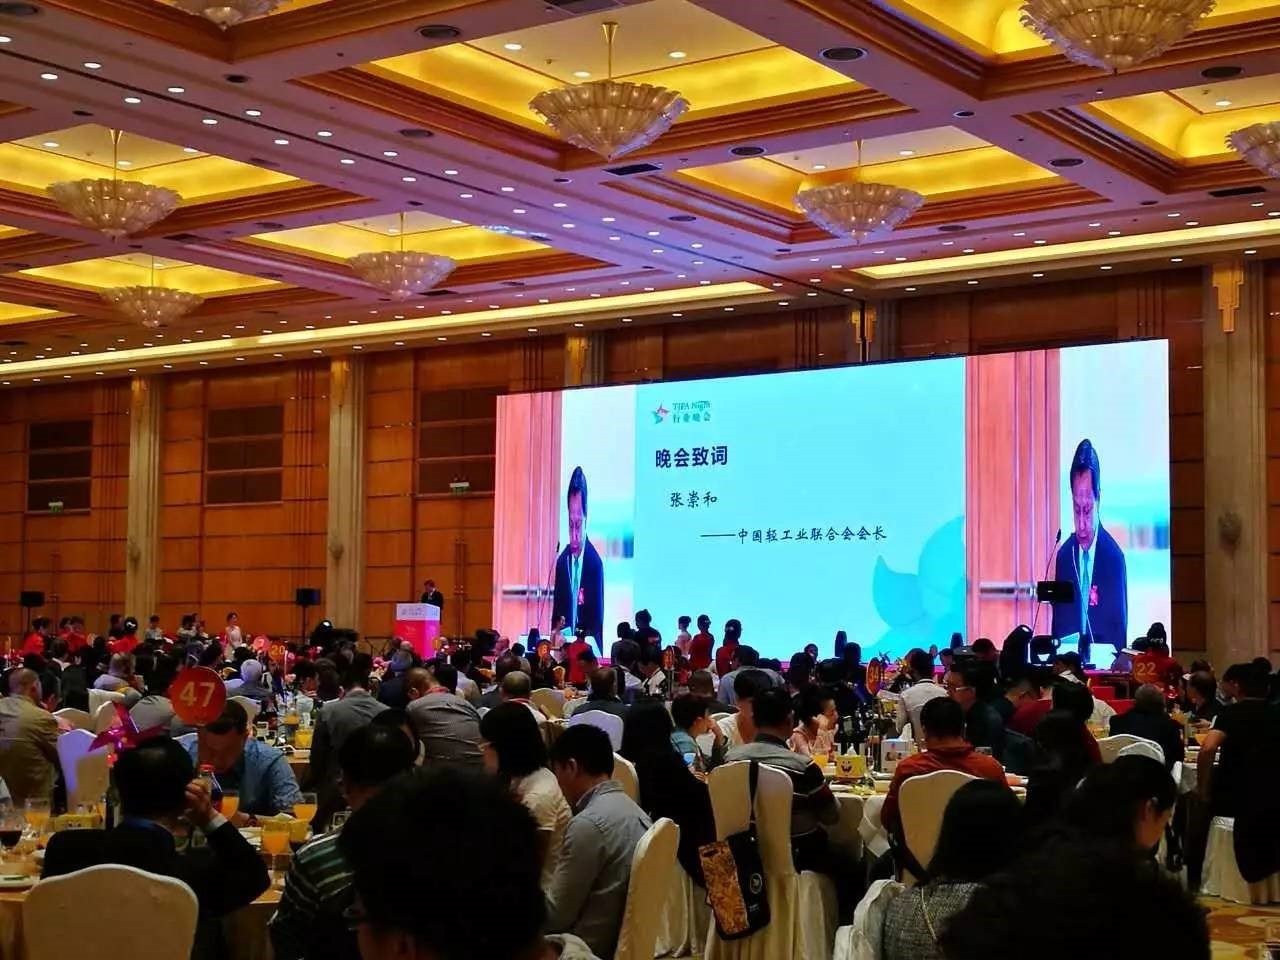 CTT attended the “China maternal and Child safety and New Business Forum 2016